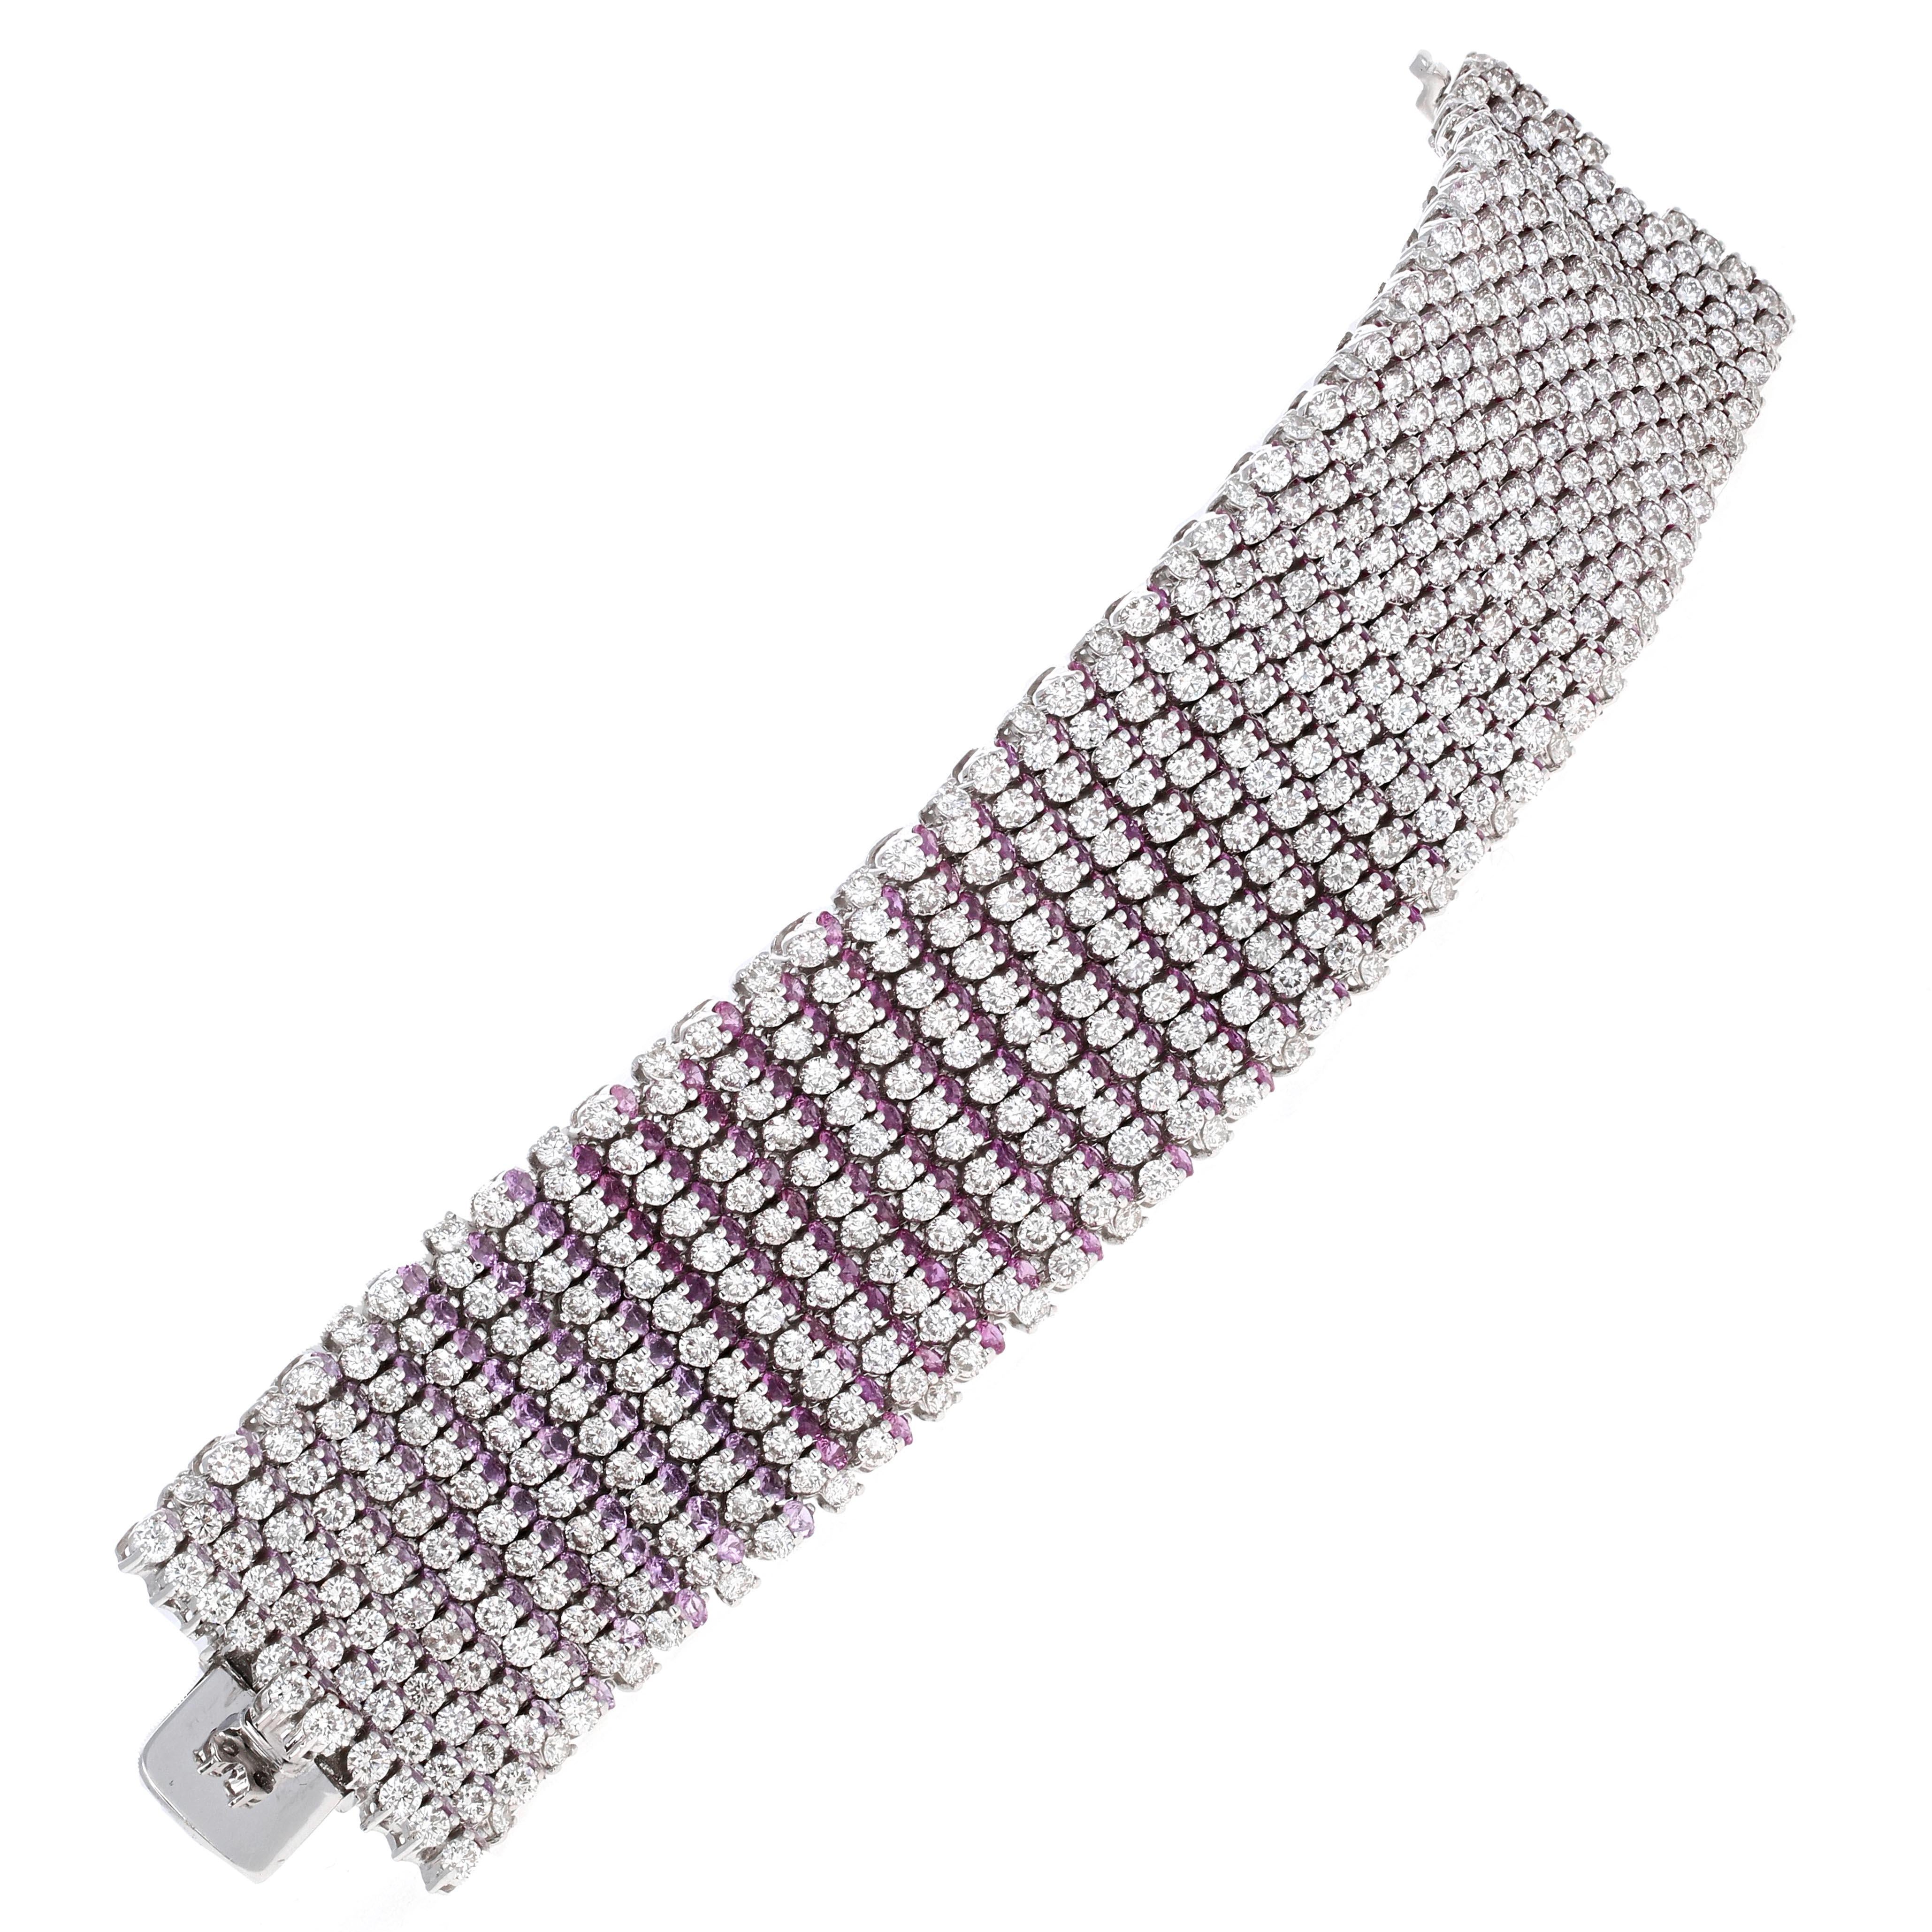 Unique ruby and pink sapphire ombre' mesh bracelet. This bracelet is a true show stopper. When you look at the bracelet from one angel it creates a dazzling ombré effect of light pink sapphires to deep red rubies. When looking at the bracelet from